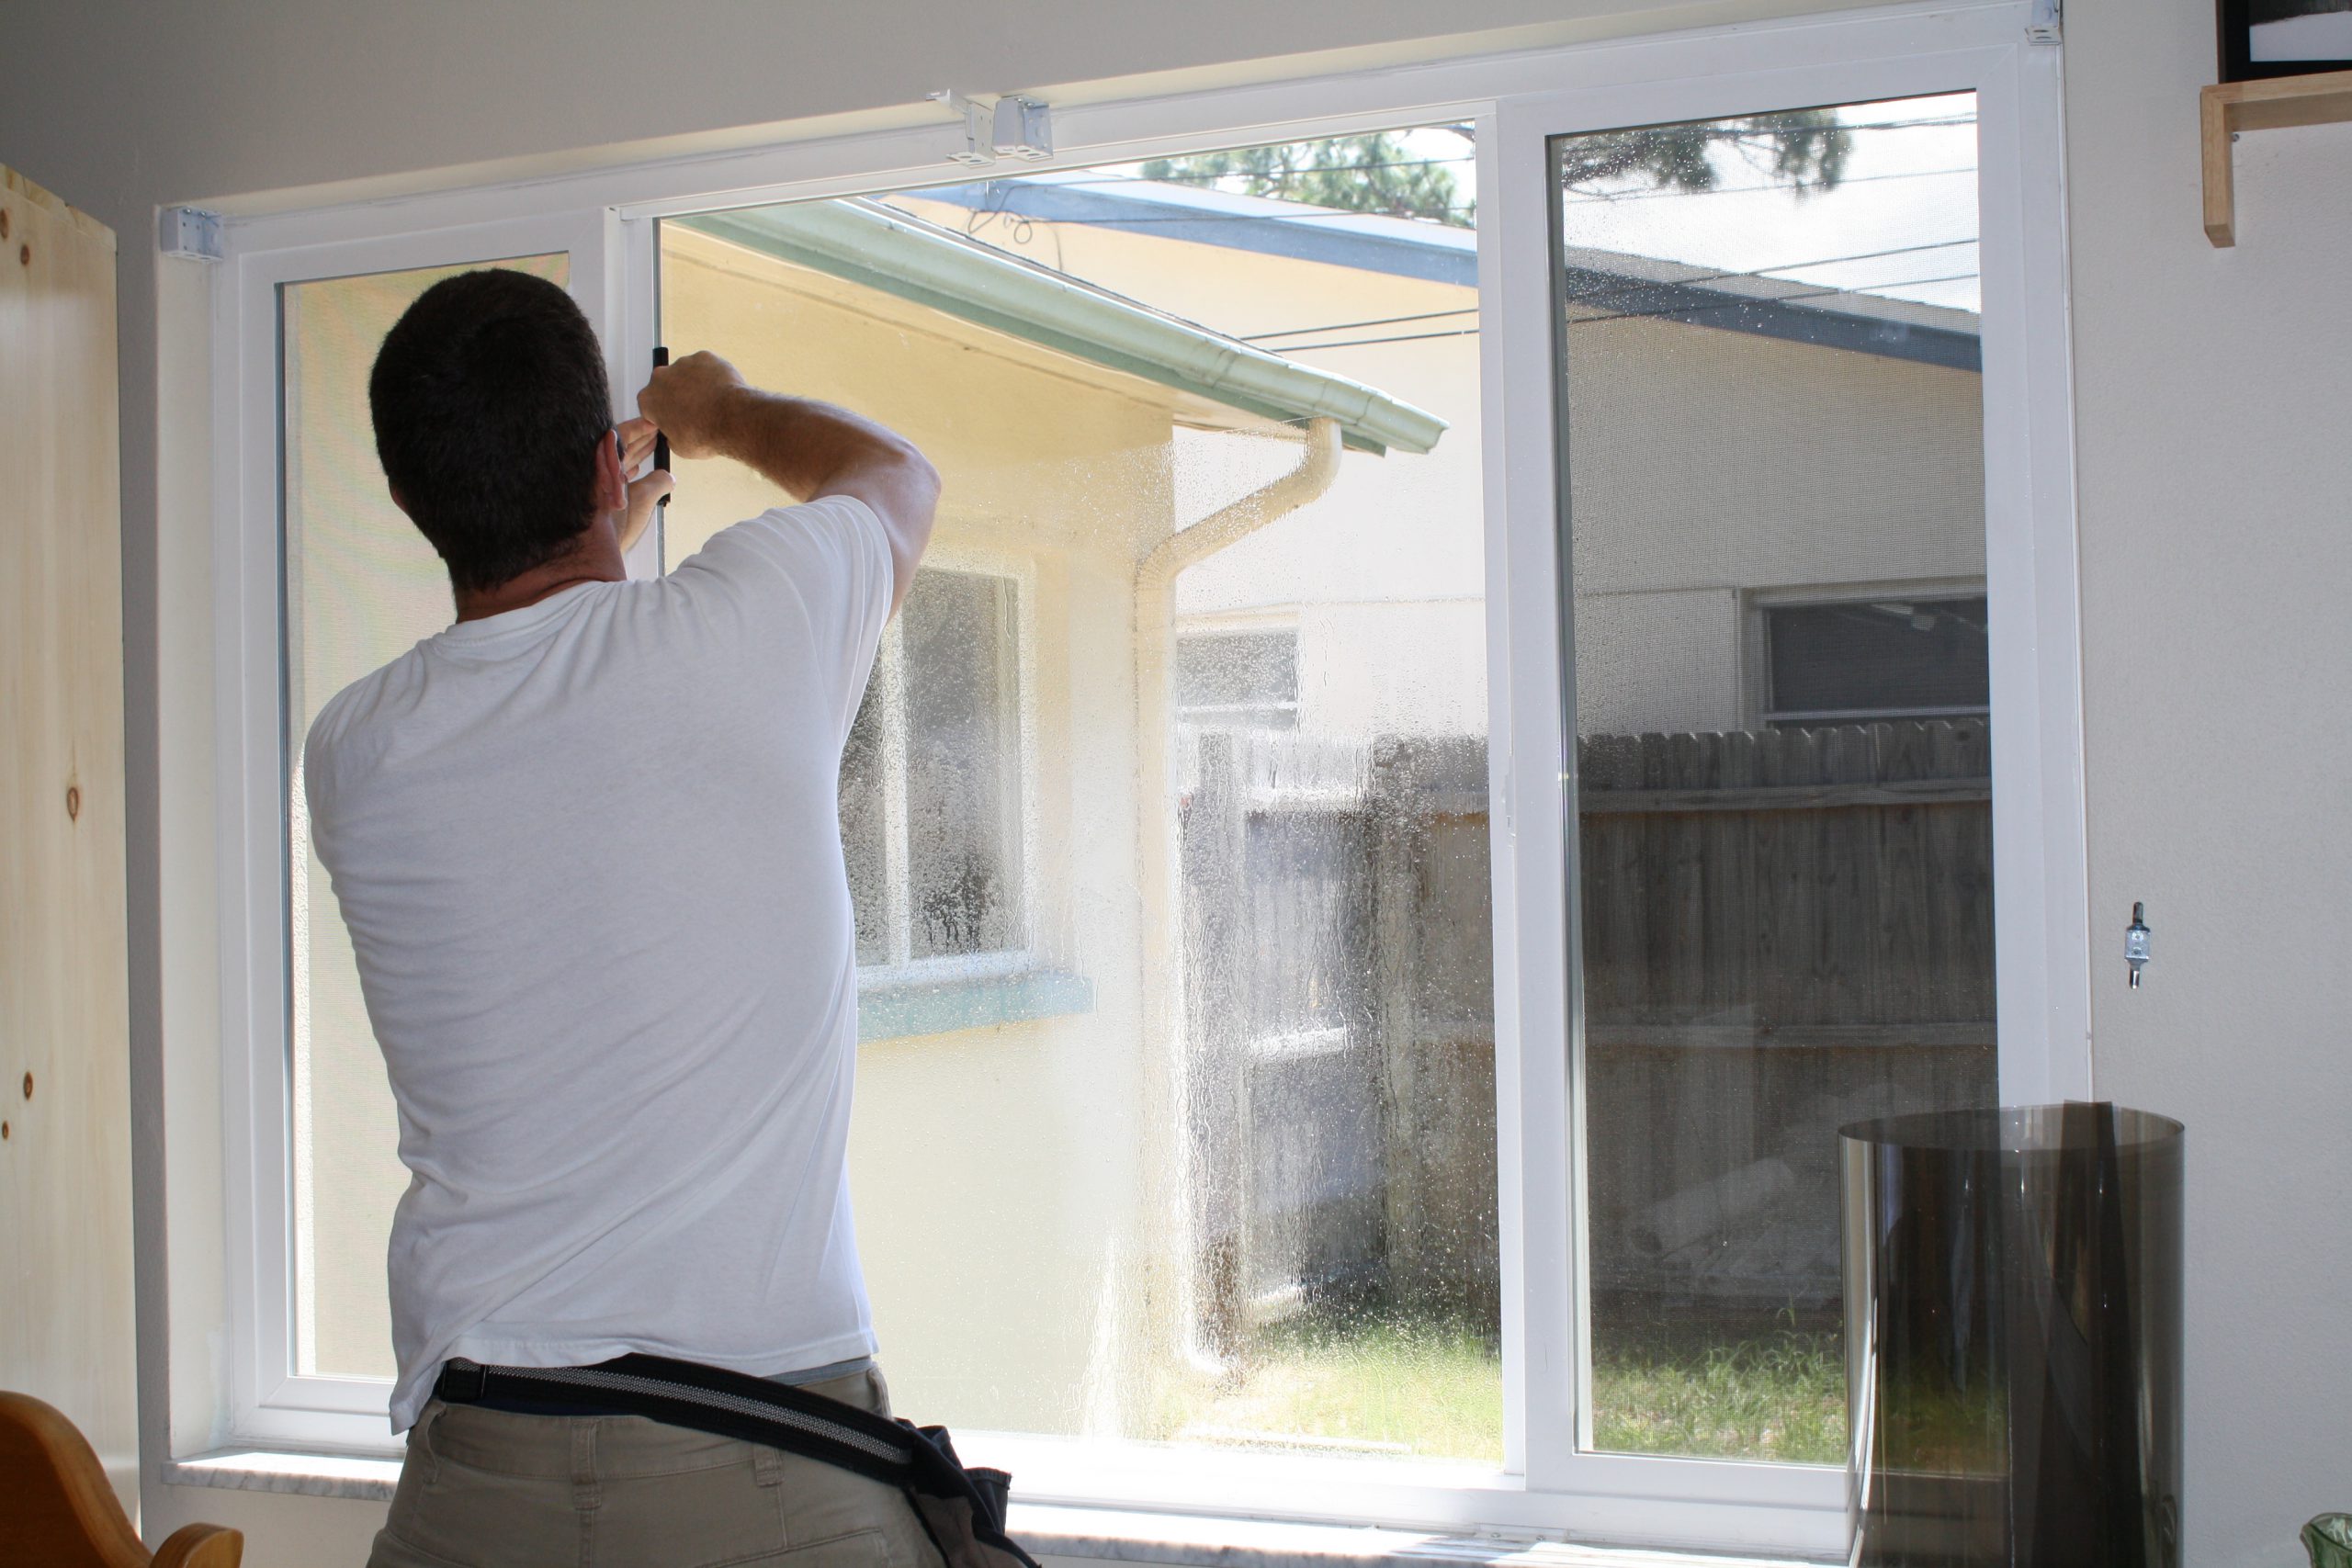 Window tint being applied to a home's windows